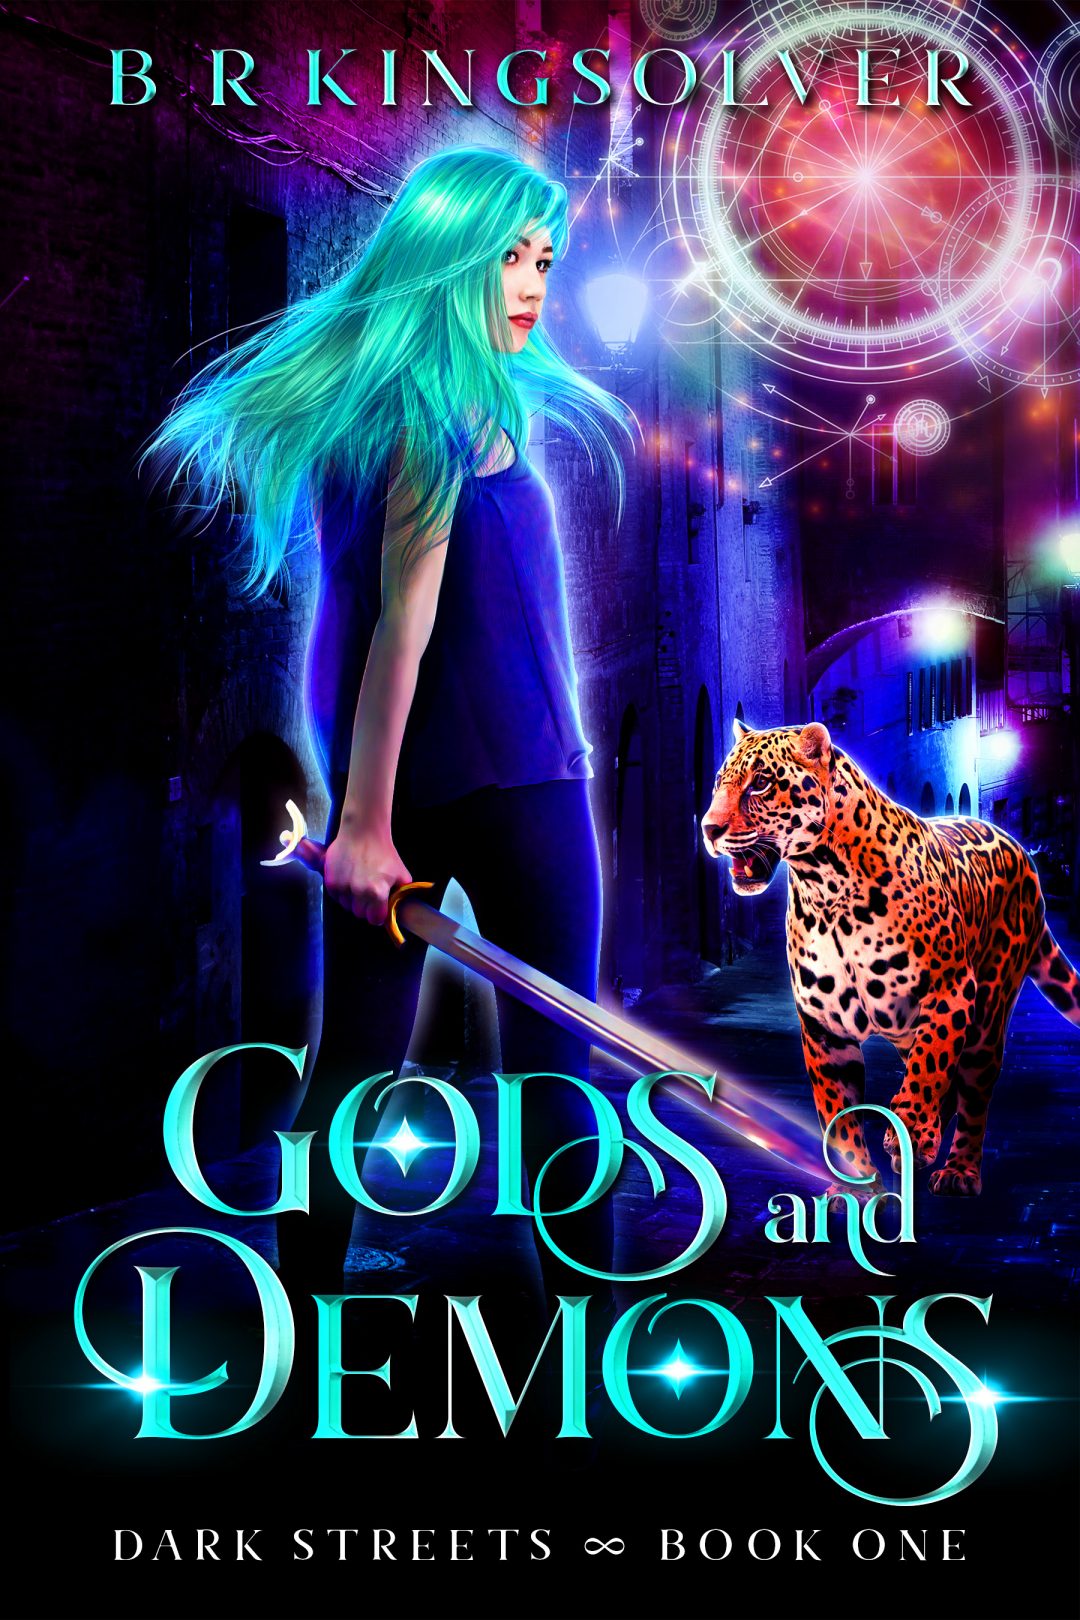 war of the gods and demons